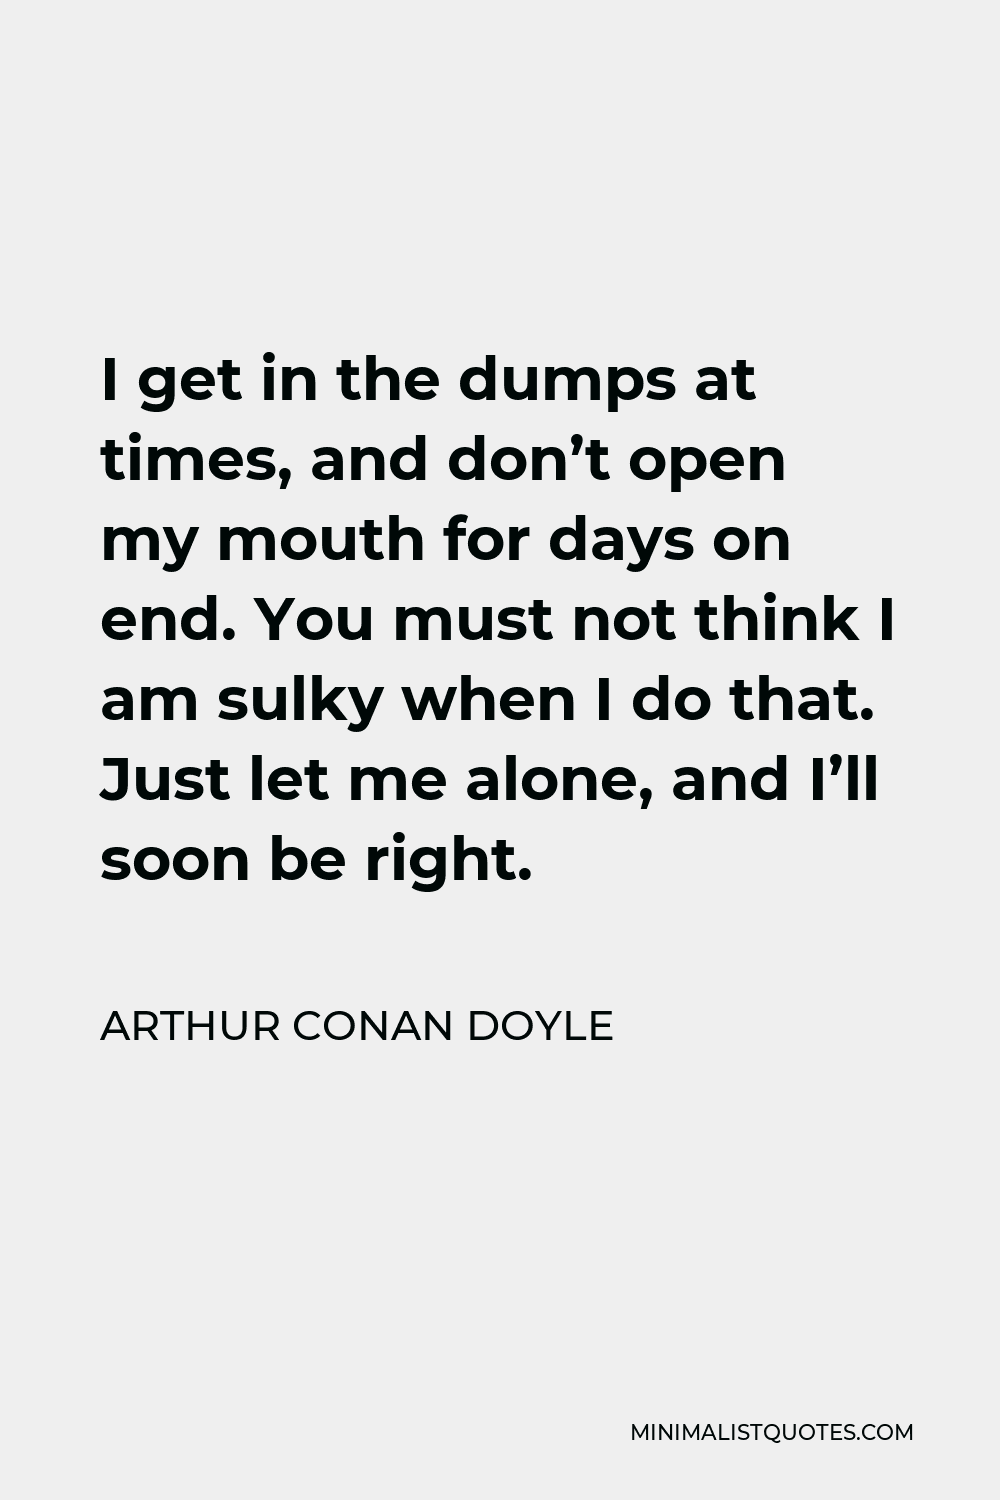 Arthur Conan Doyle Quote - I get in the dumps at times, and don’t open my mouth for days on end. You must not think I am sulky when I do that. Just let me alone, and I’ll soon be right.